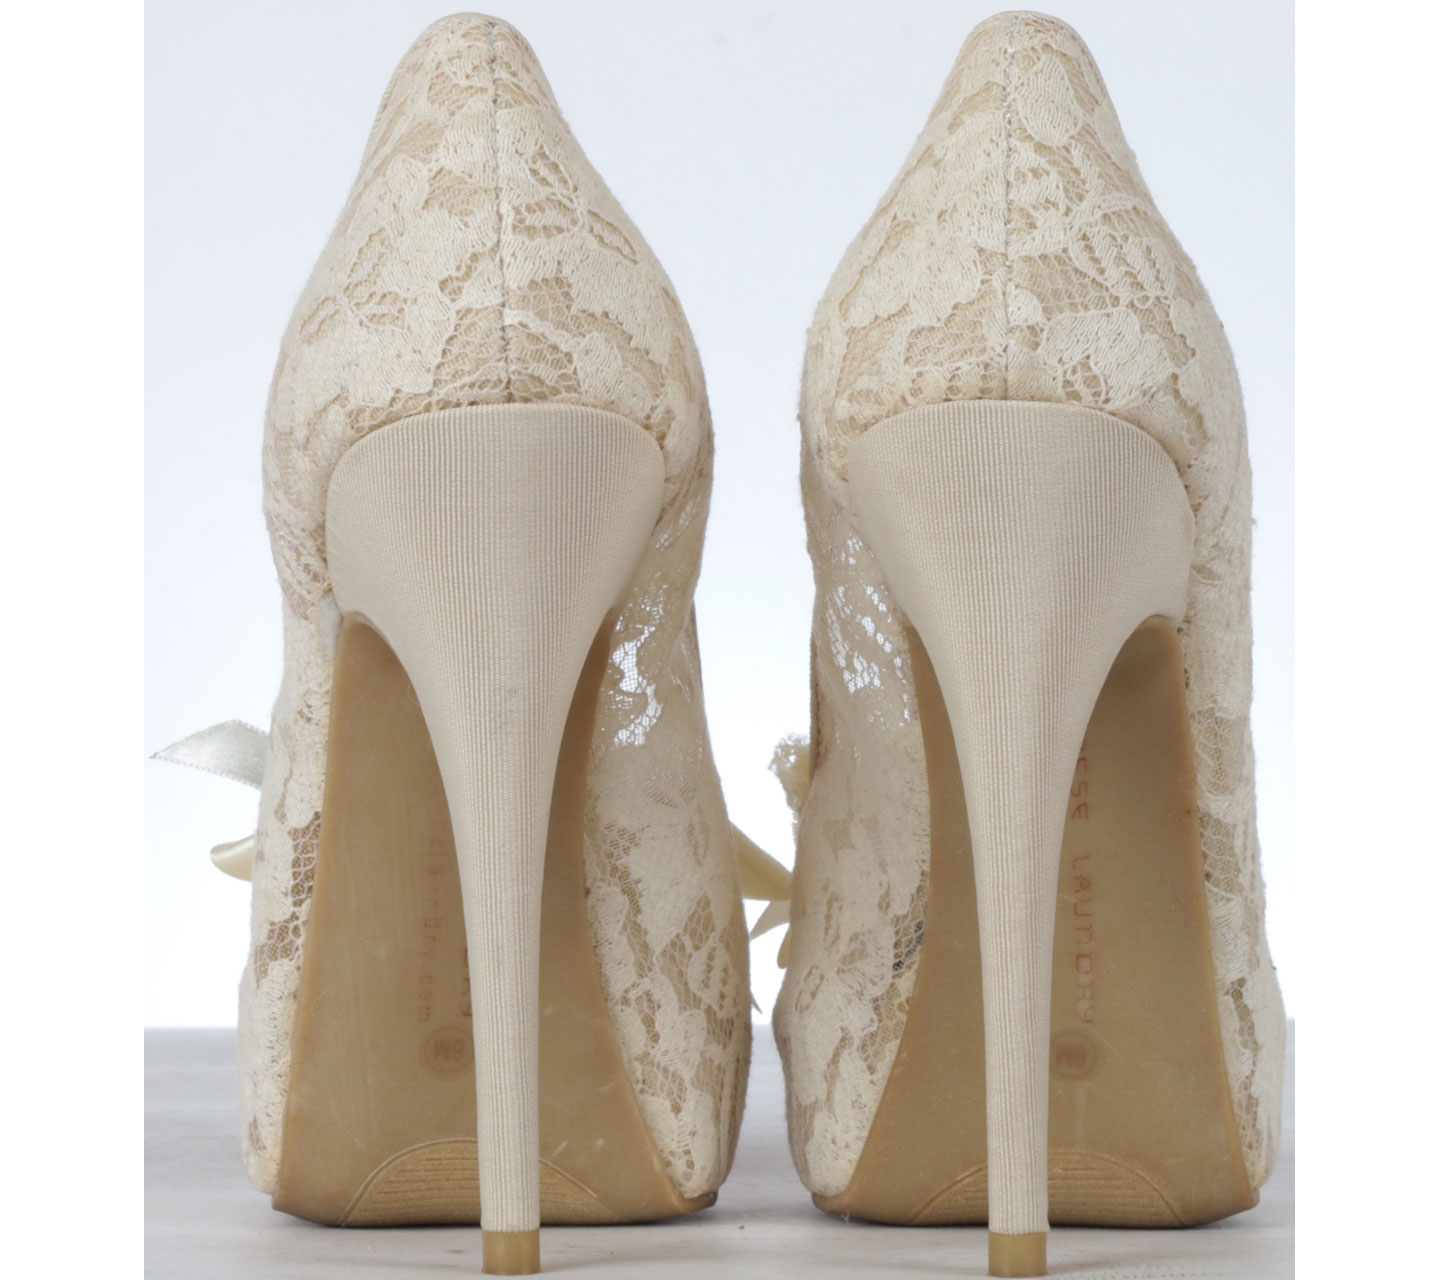 Chinese Laundry Cream Lace Heels